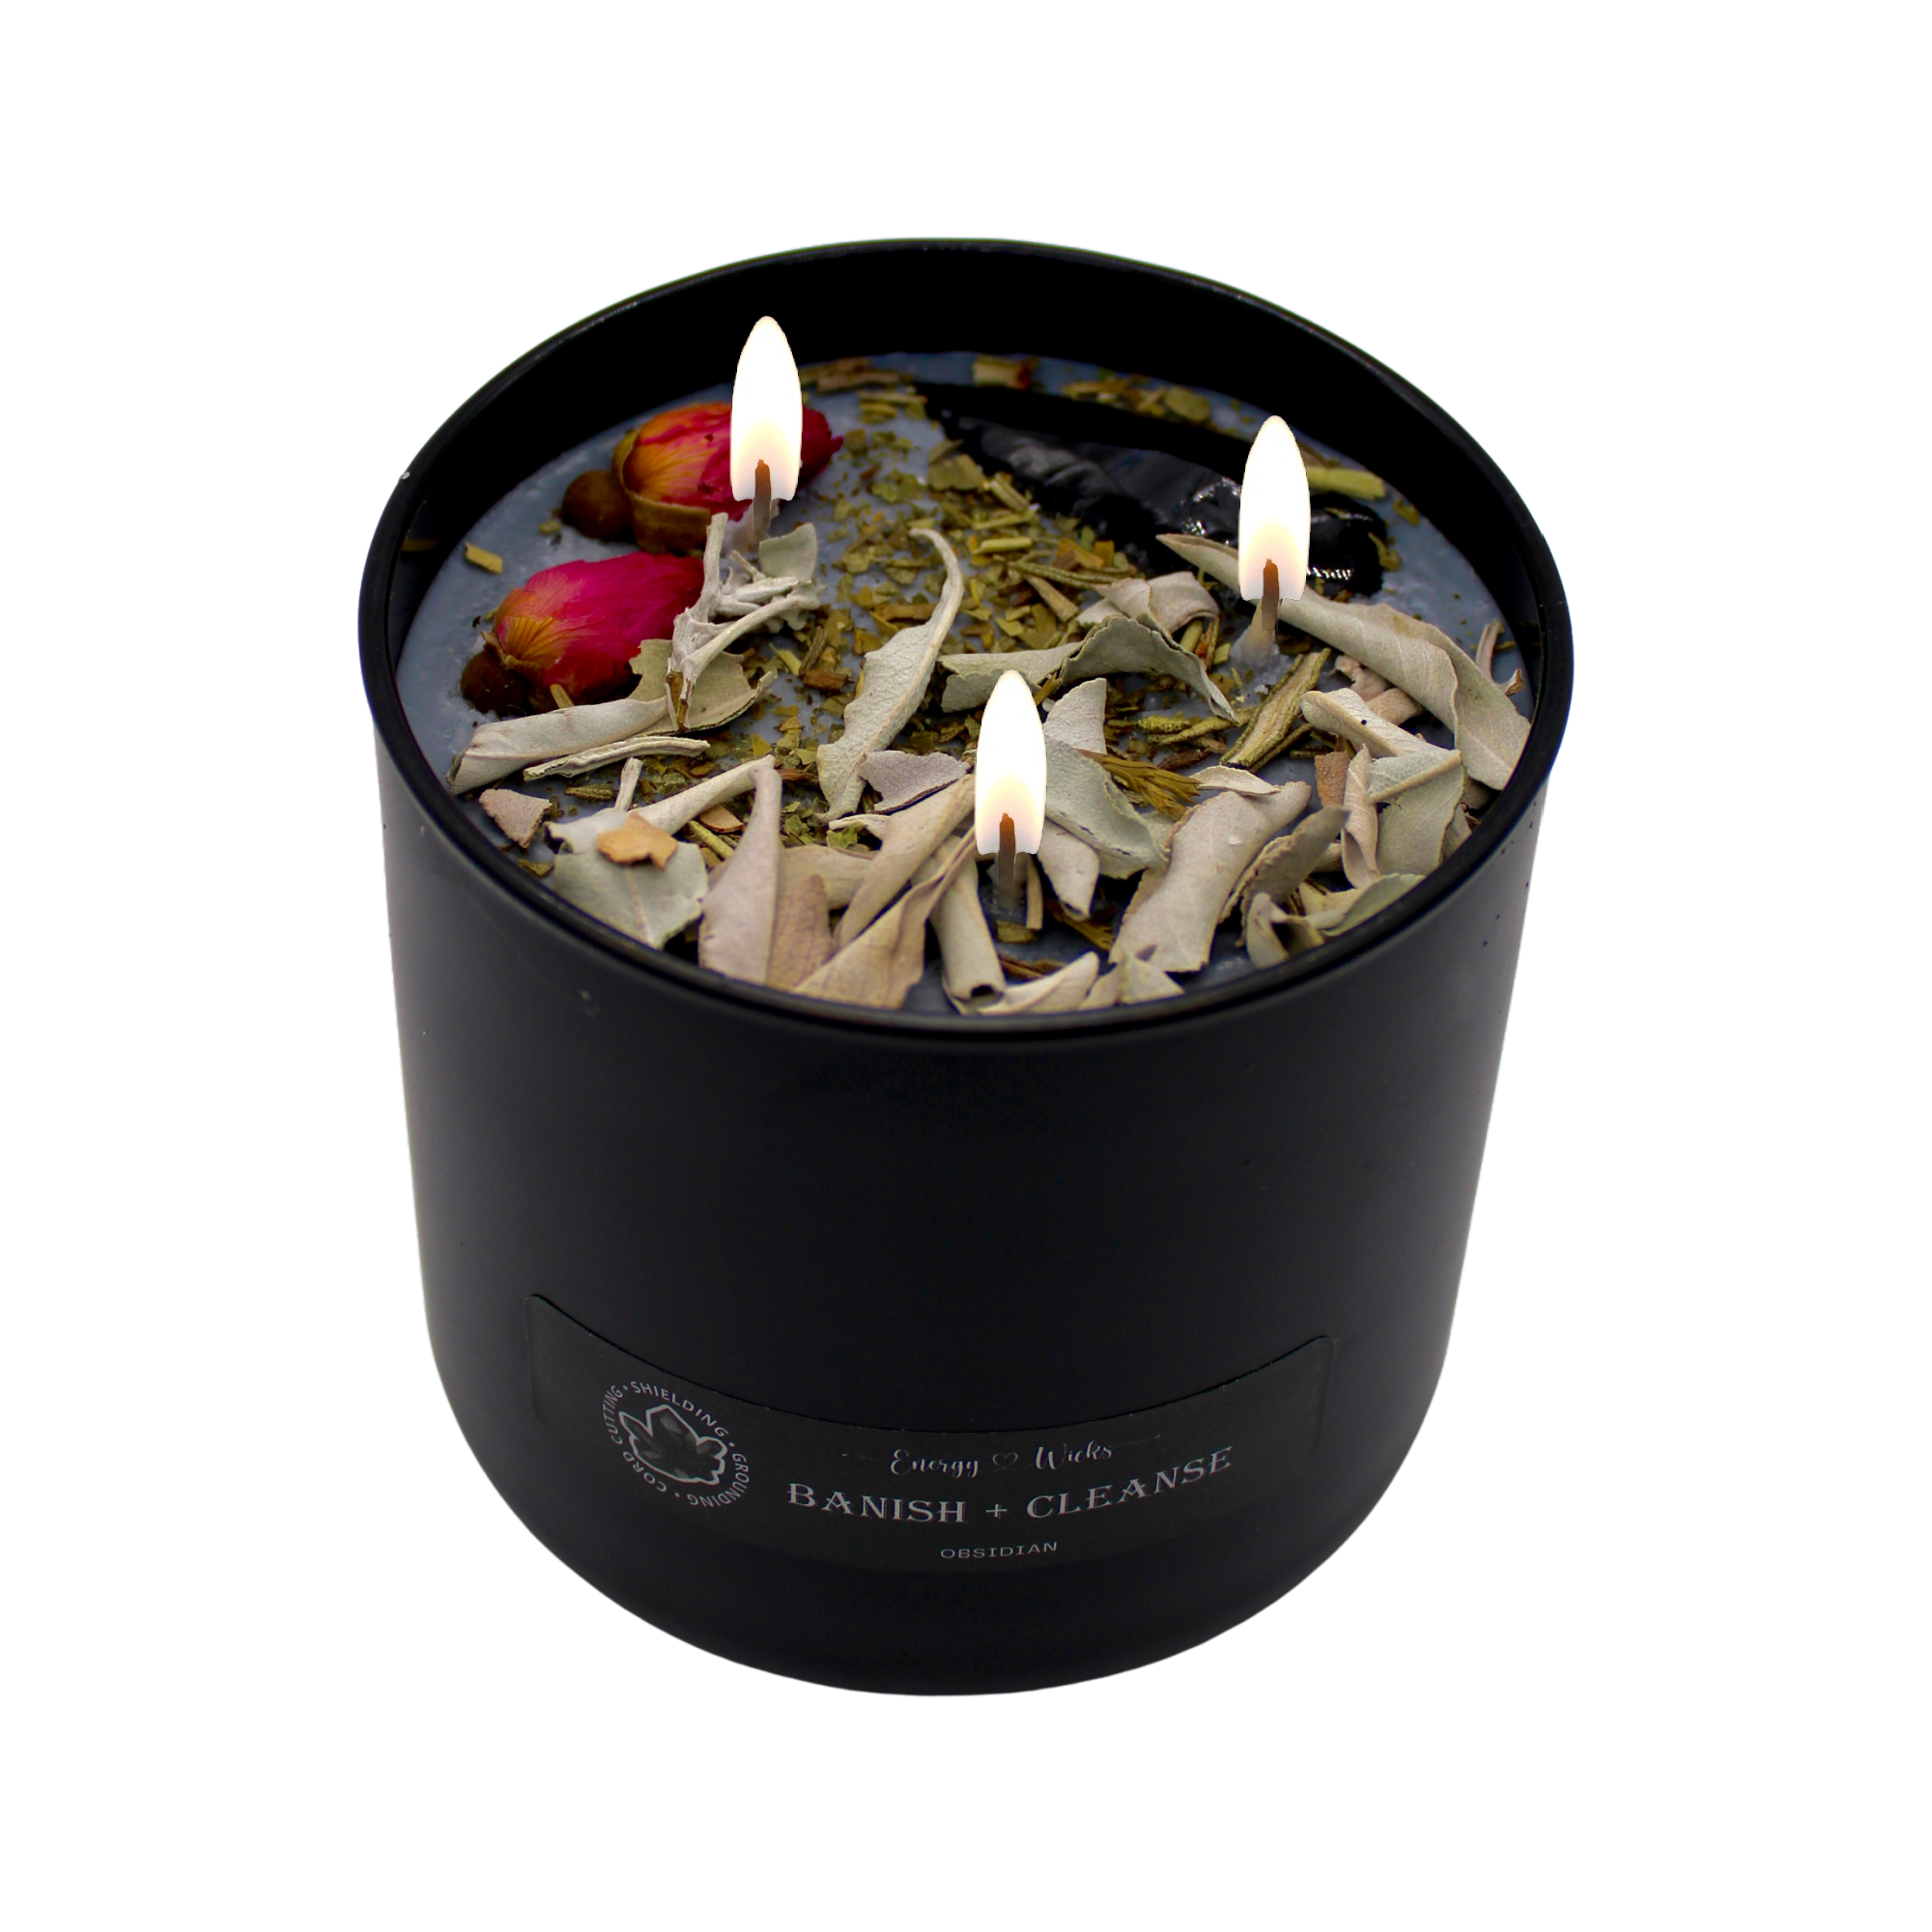 Banish and Cleanse 3 Wick Candle - Energy Wicks